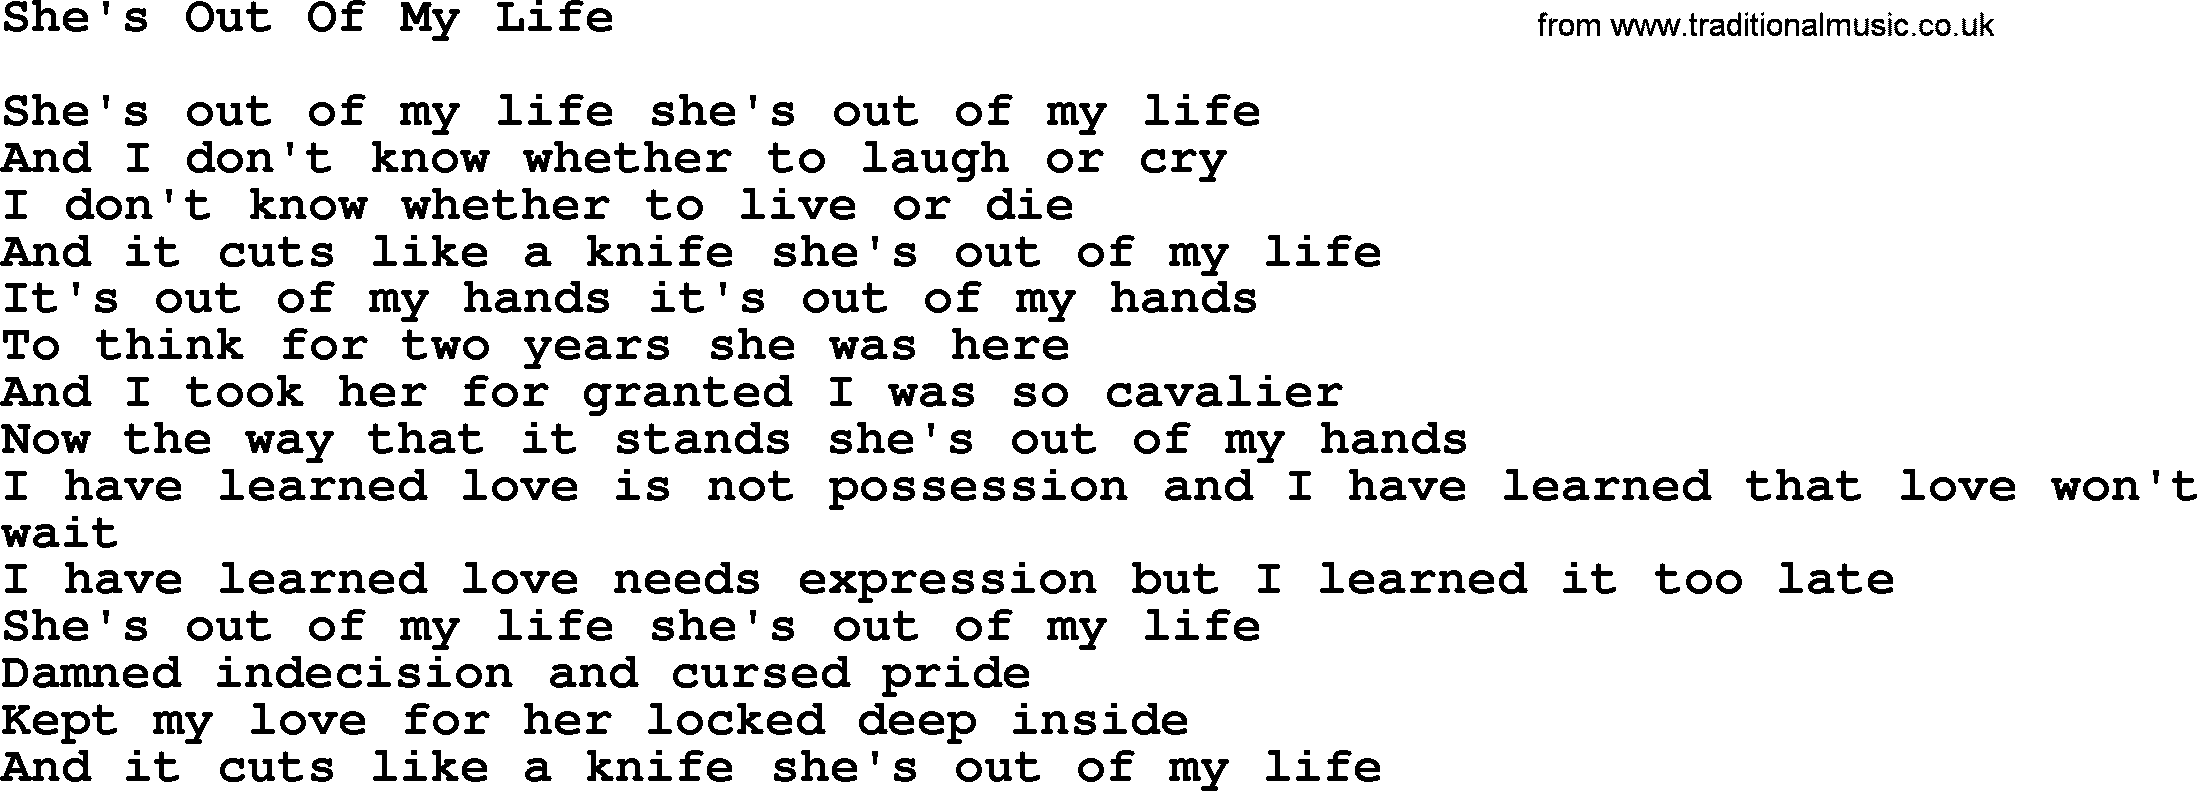 Willie Nelson song: She's Out Of My Life lyrics